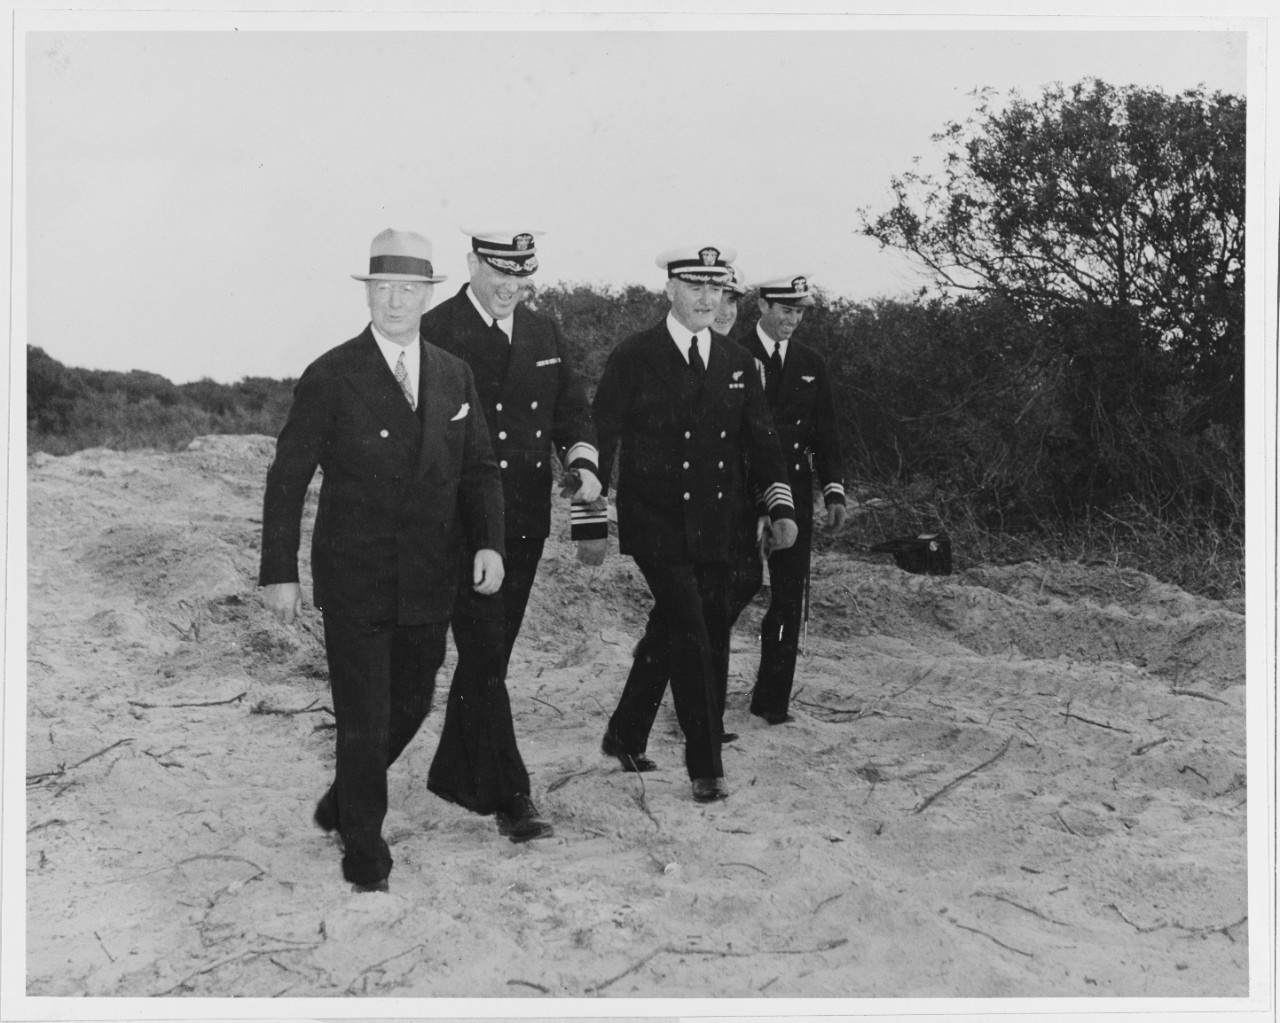 Naval Officials inspecting U.S. Naval Air Station, Corpus Christi, Texas. March 12, 1941